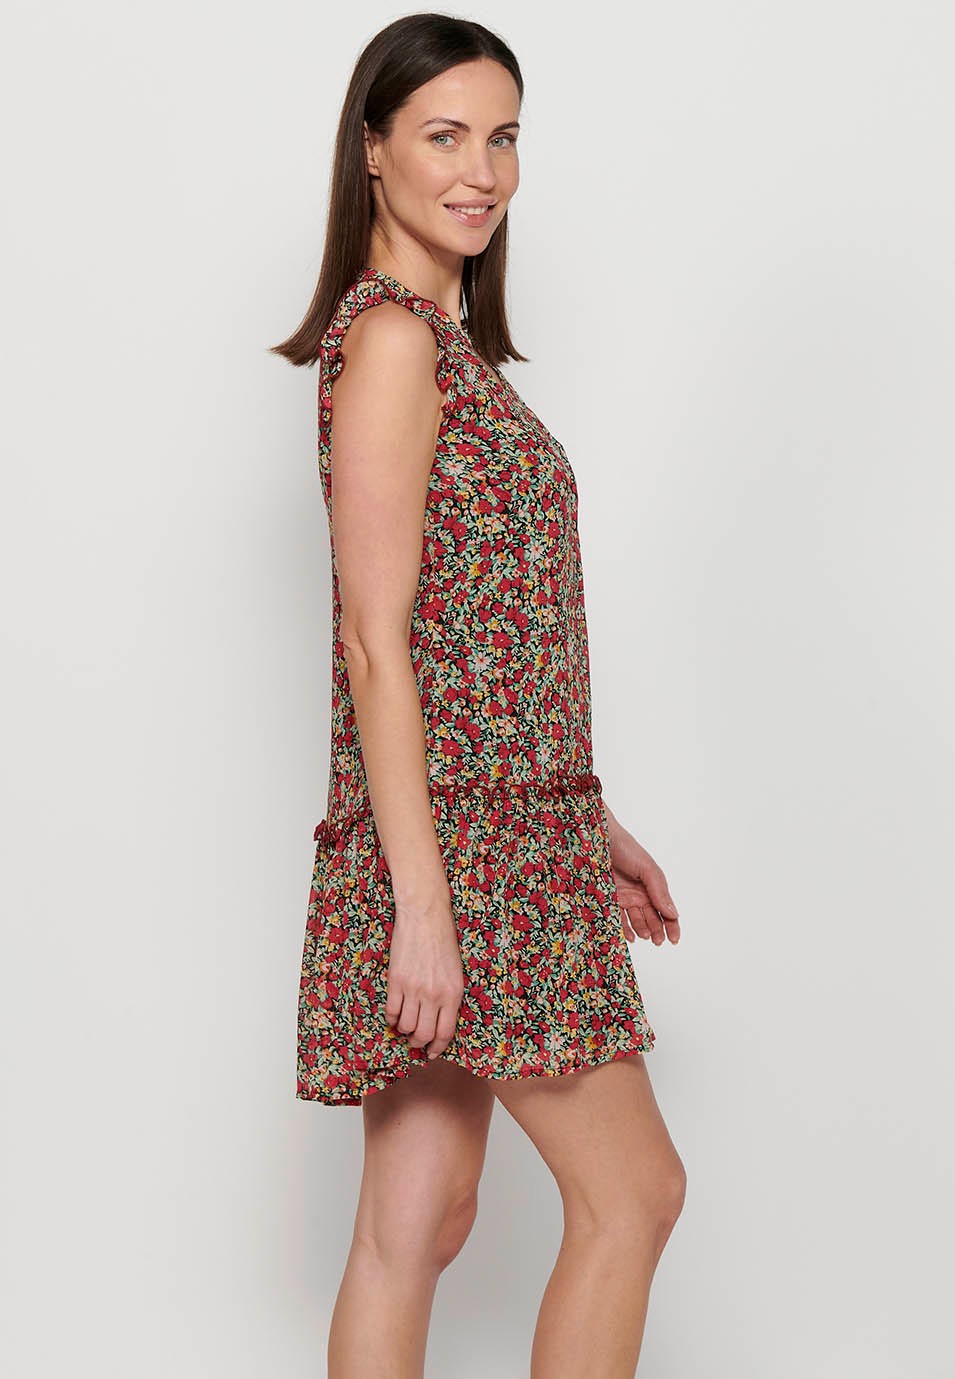 Short shirt dress with hip cut and ruffle finish with button front closure and Multicolor floral print for Women 8